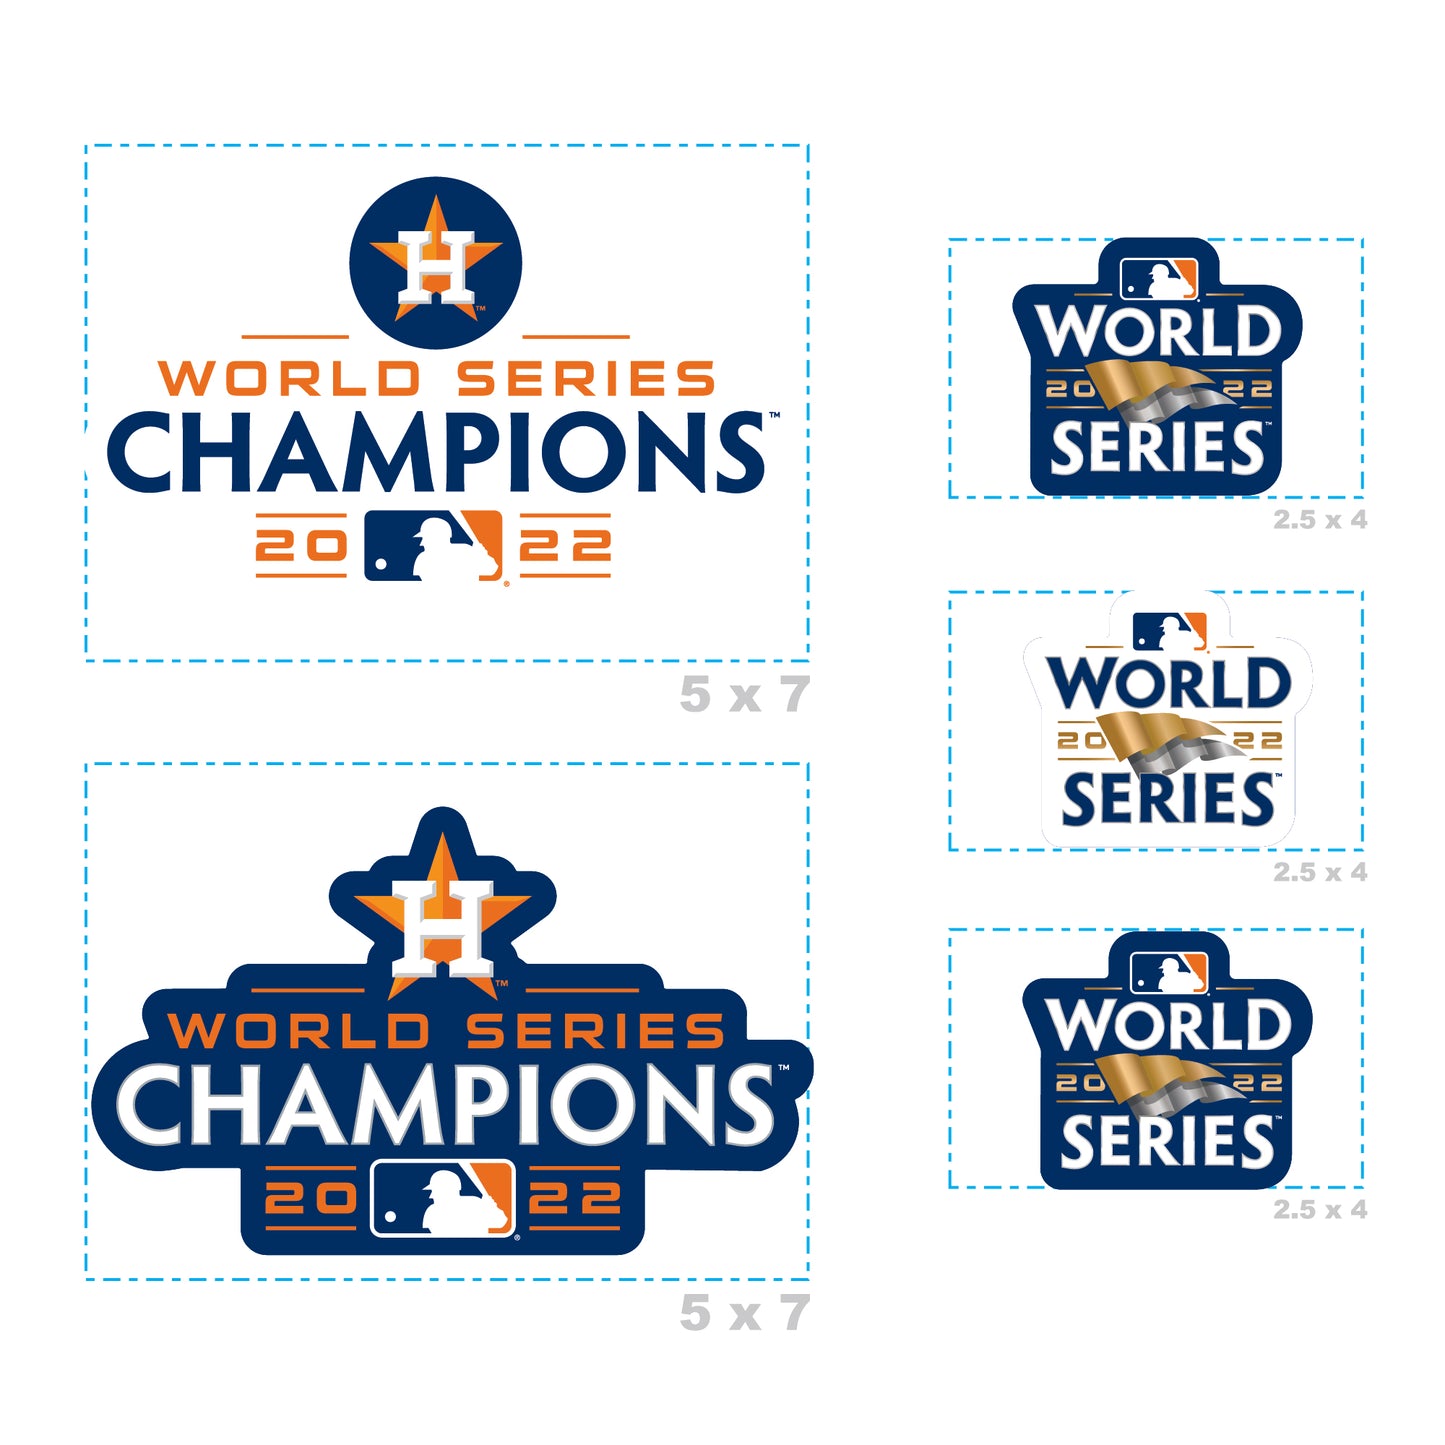 Houston Astros: 2022 World Series Champions Mini Cardstock Cutout -  Officially Licensed MLB Stand Out